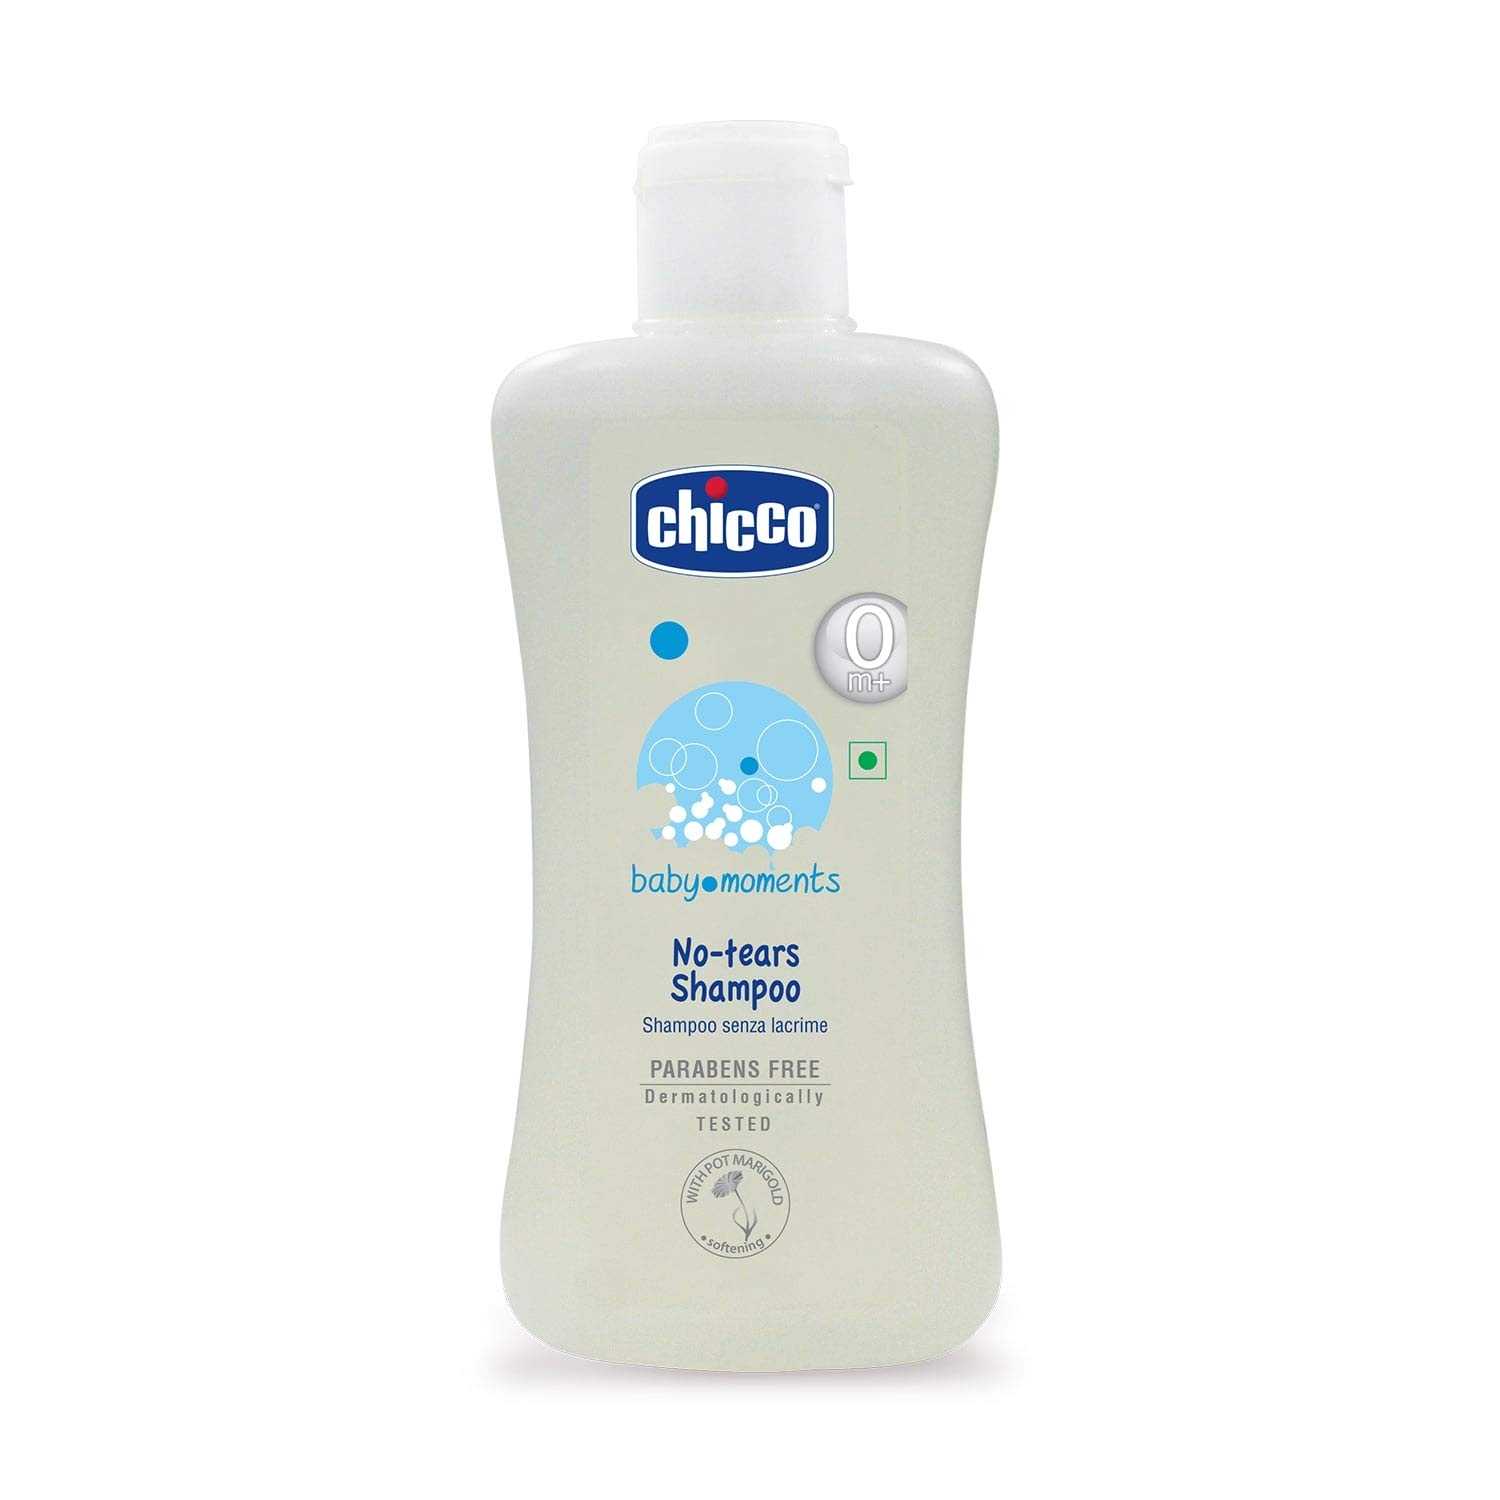 Best baby shampoo in India